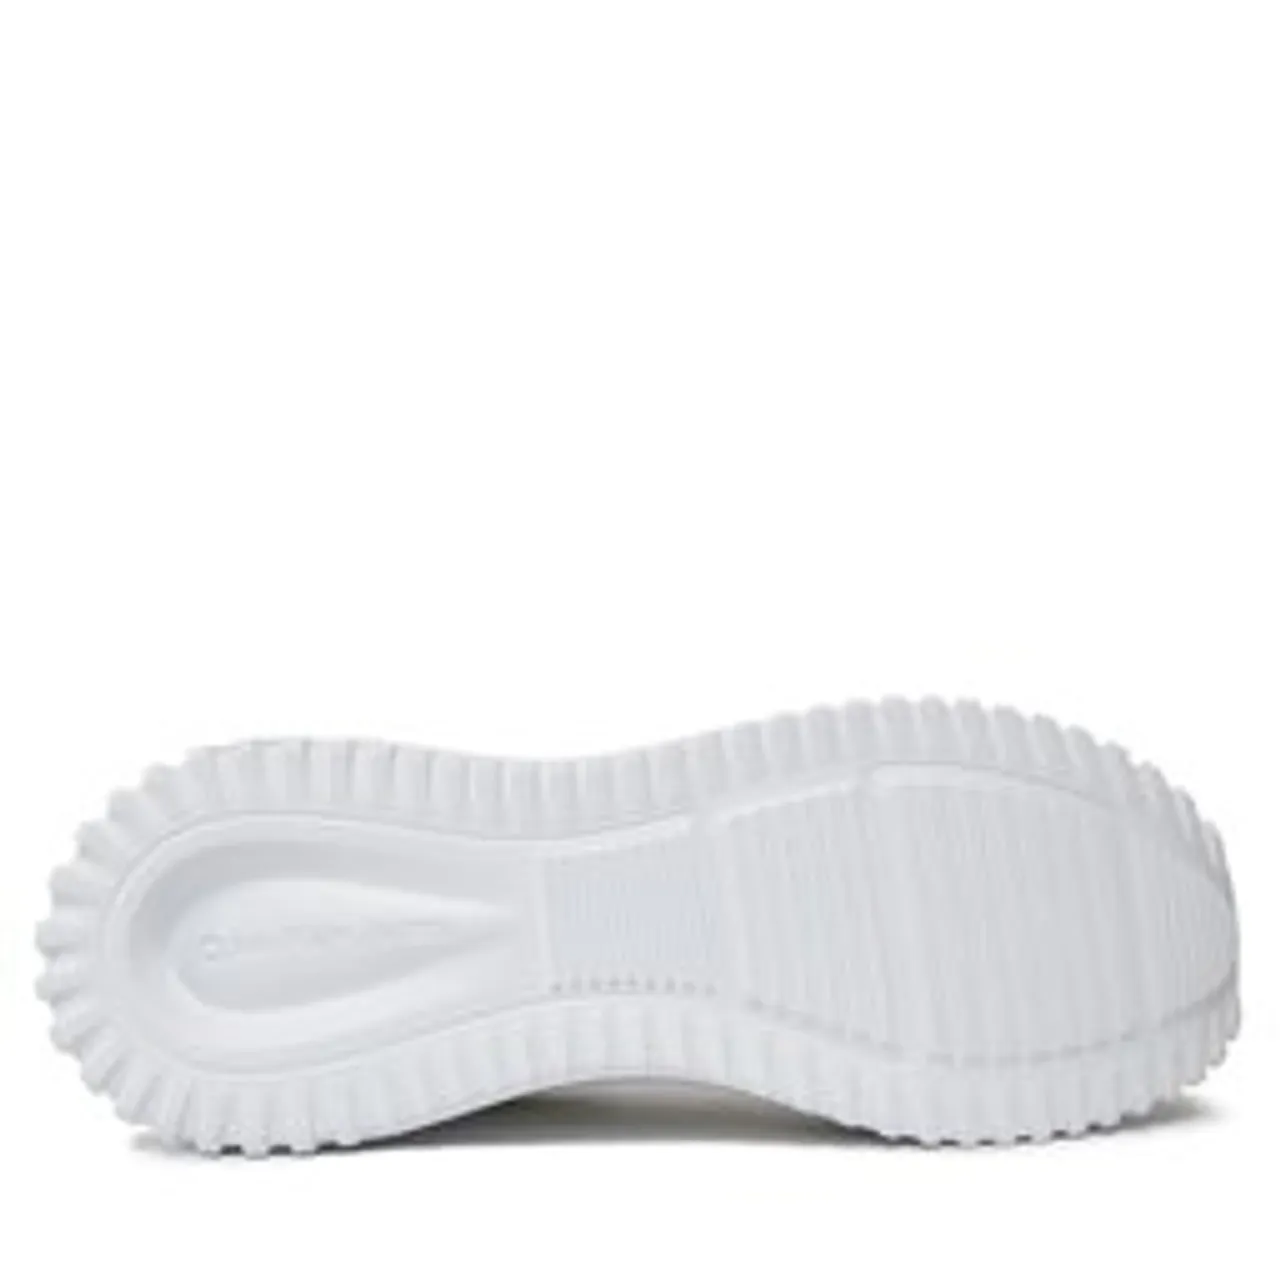 Sneakers Calvin Klein Jeans YW0YW01442 Bright White/Oyster Mushroom 01V